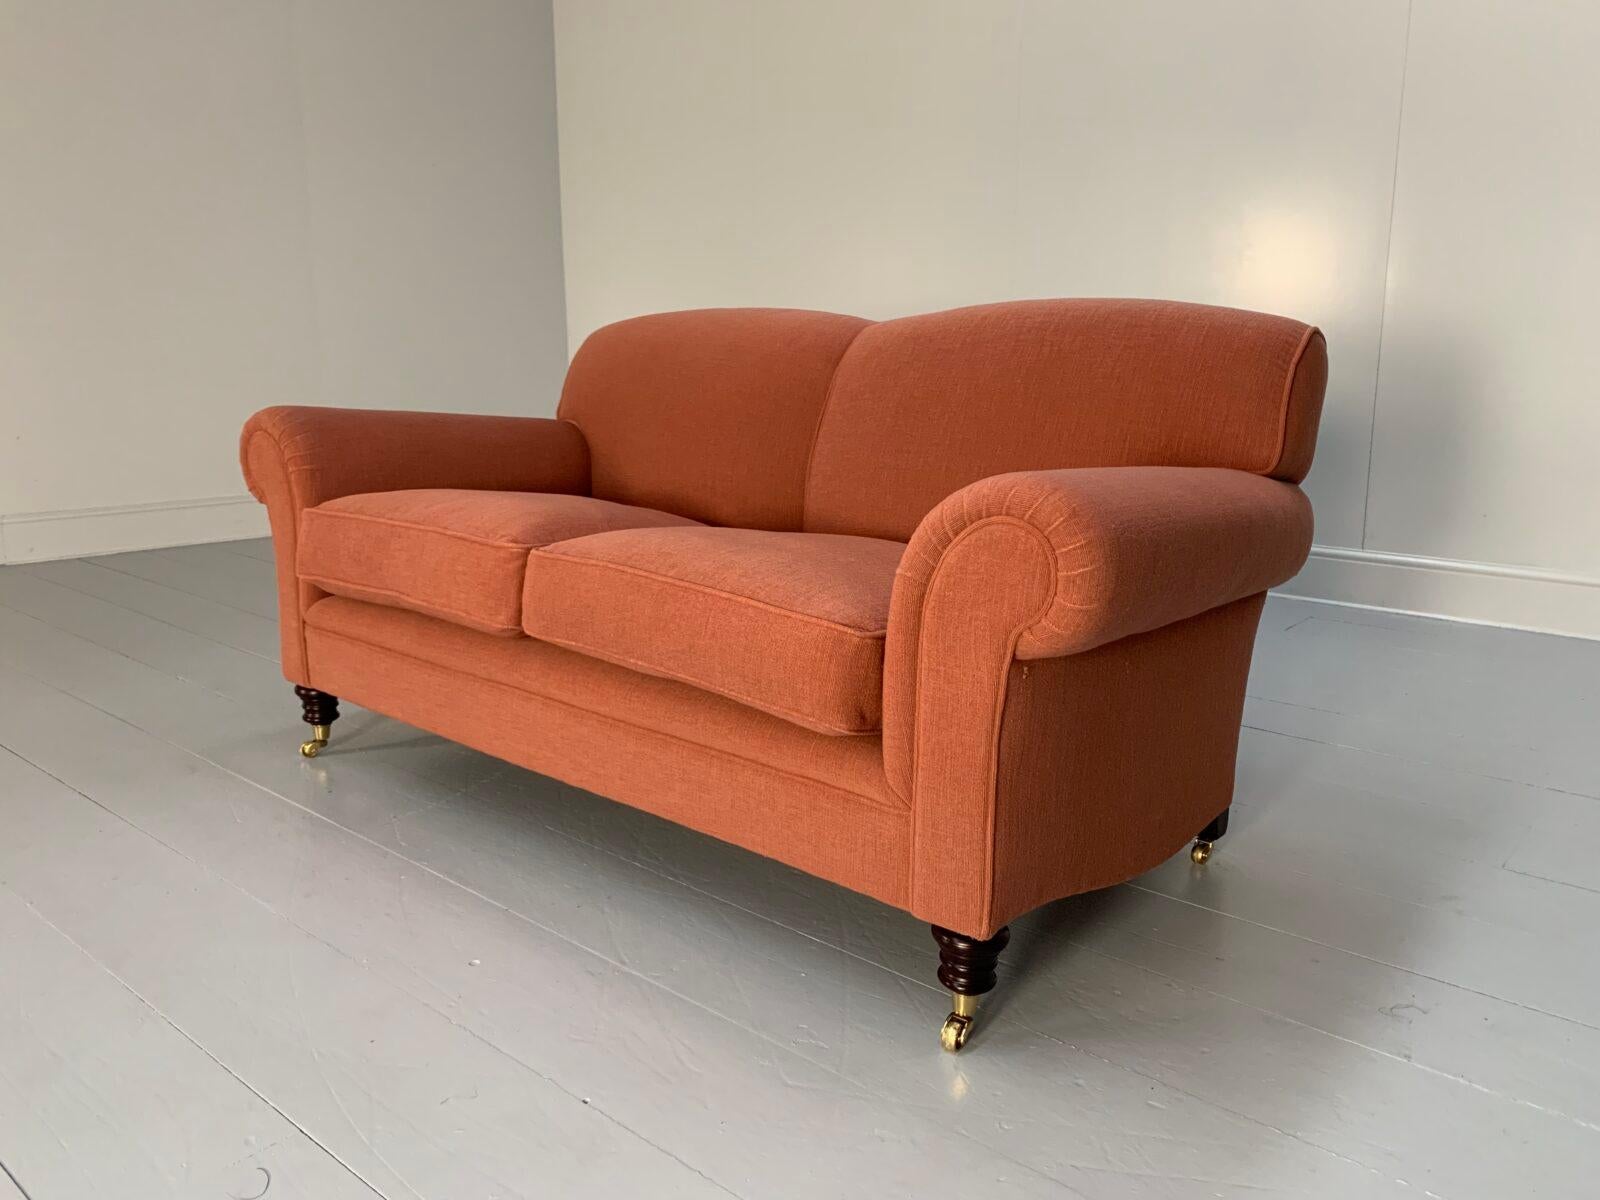 Hello Friends, and welcome to another unmissable offering from Lord Browns Furniture, the UK’s premier resource for fine Sofas and Chairs.

On offer on this occasion is a superb, immaculate George Smith Signature “Elverdon-Arm” fixed-back “Medium”